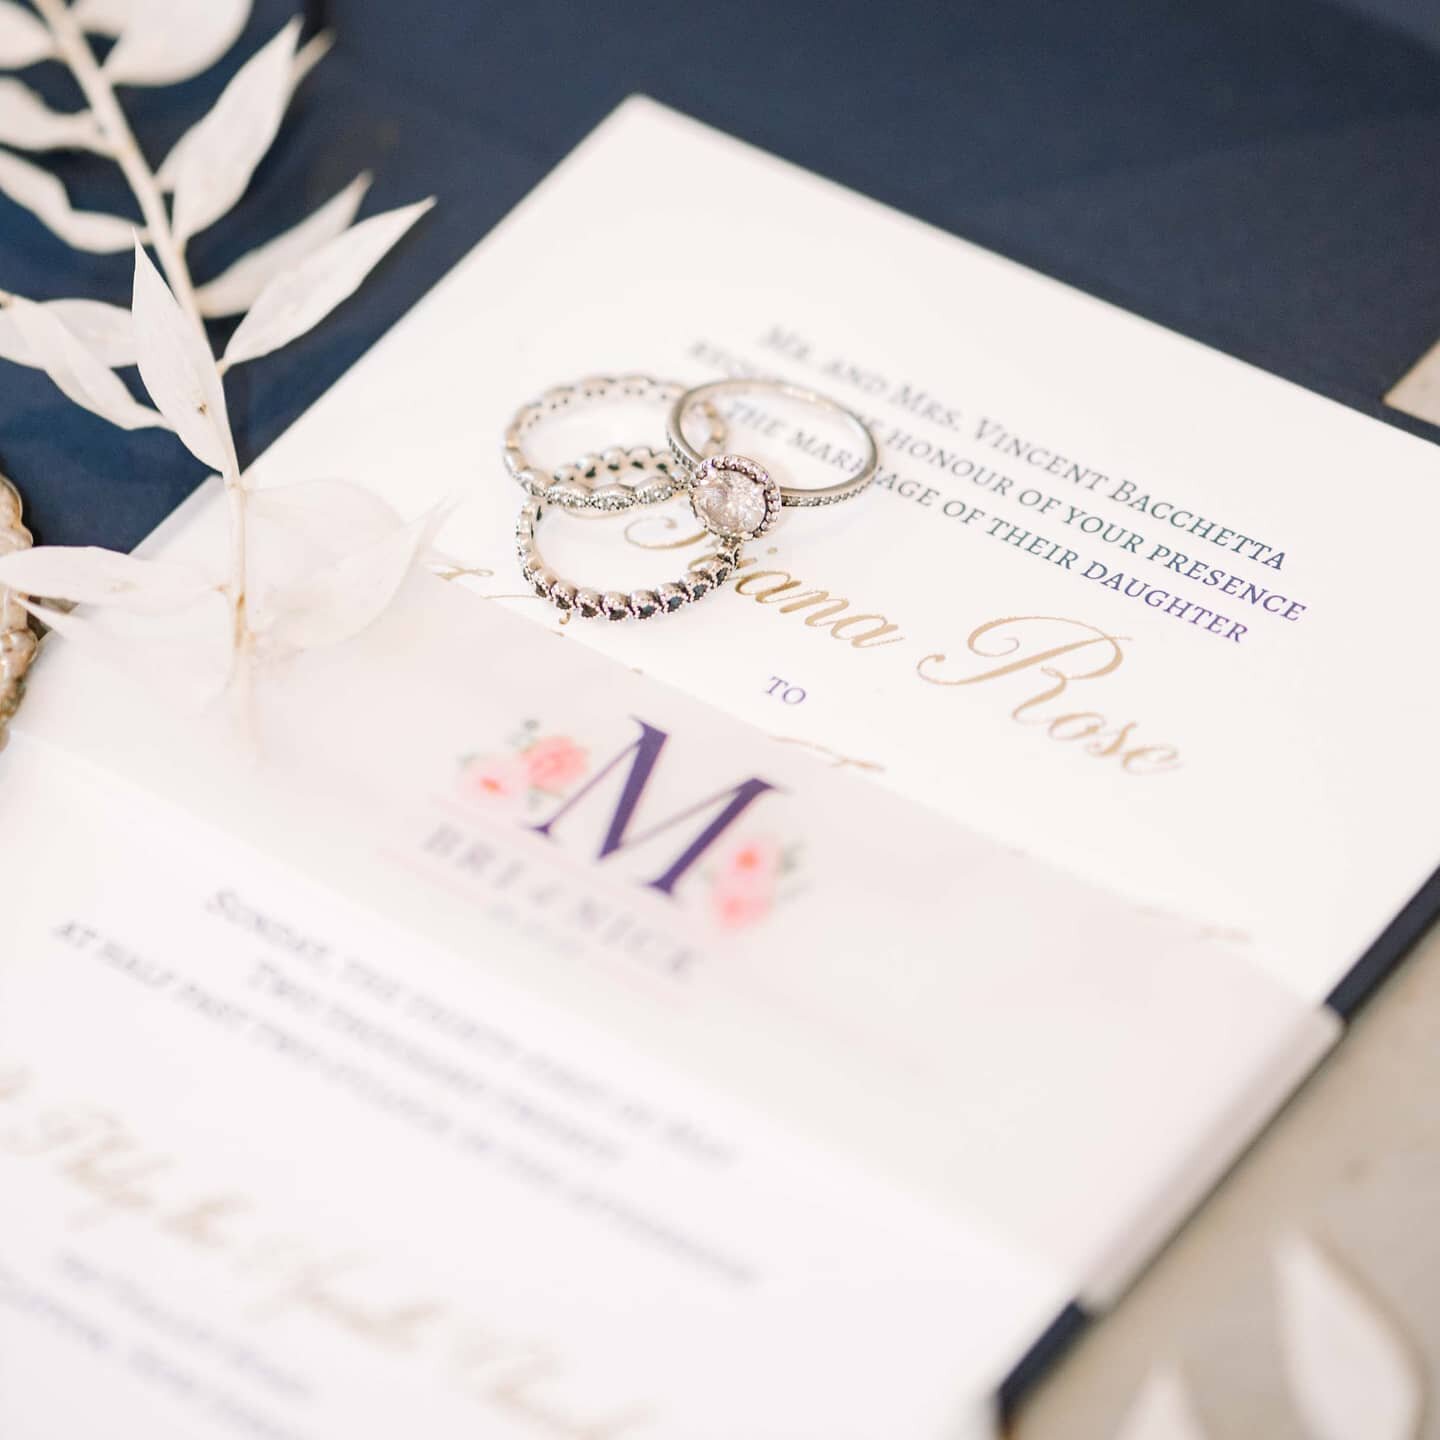 Wrapping the pieces of your invitation suite together with a band or ribbon makes it feel like a little gift as your guests open it! How about this beautiful semi-transparent vellum band? 😍